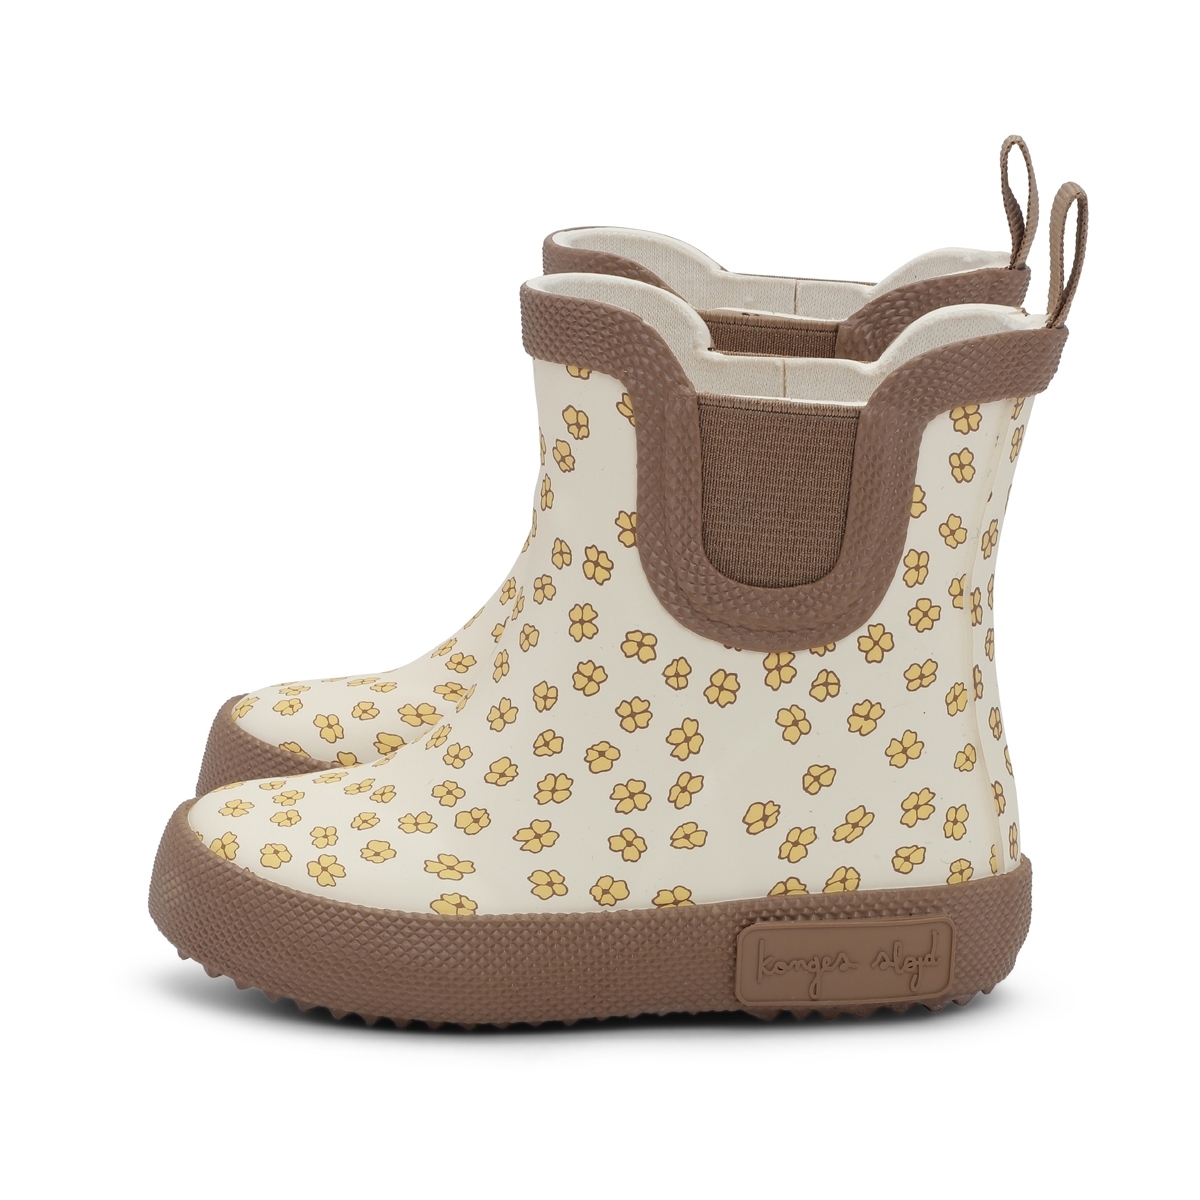 Konges Slojd Welly Rubber boots Buttercup Yellow KS1678-BUTTERCUP-YELLOW 